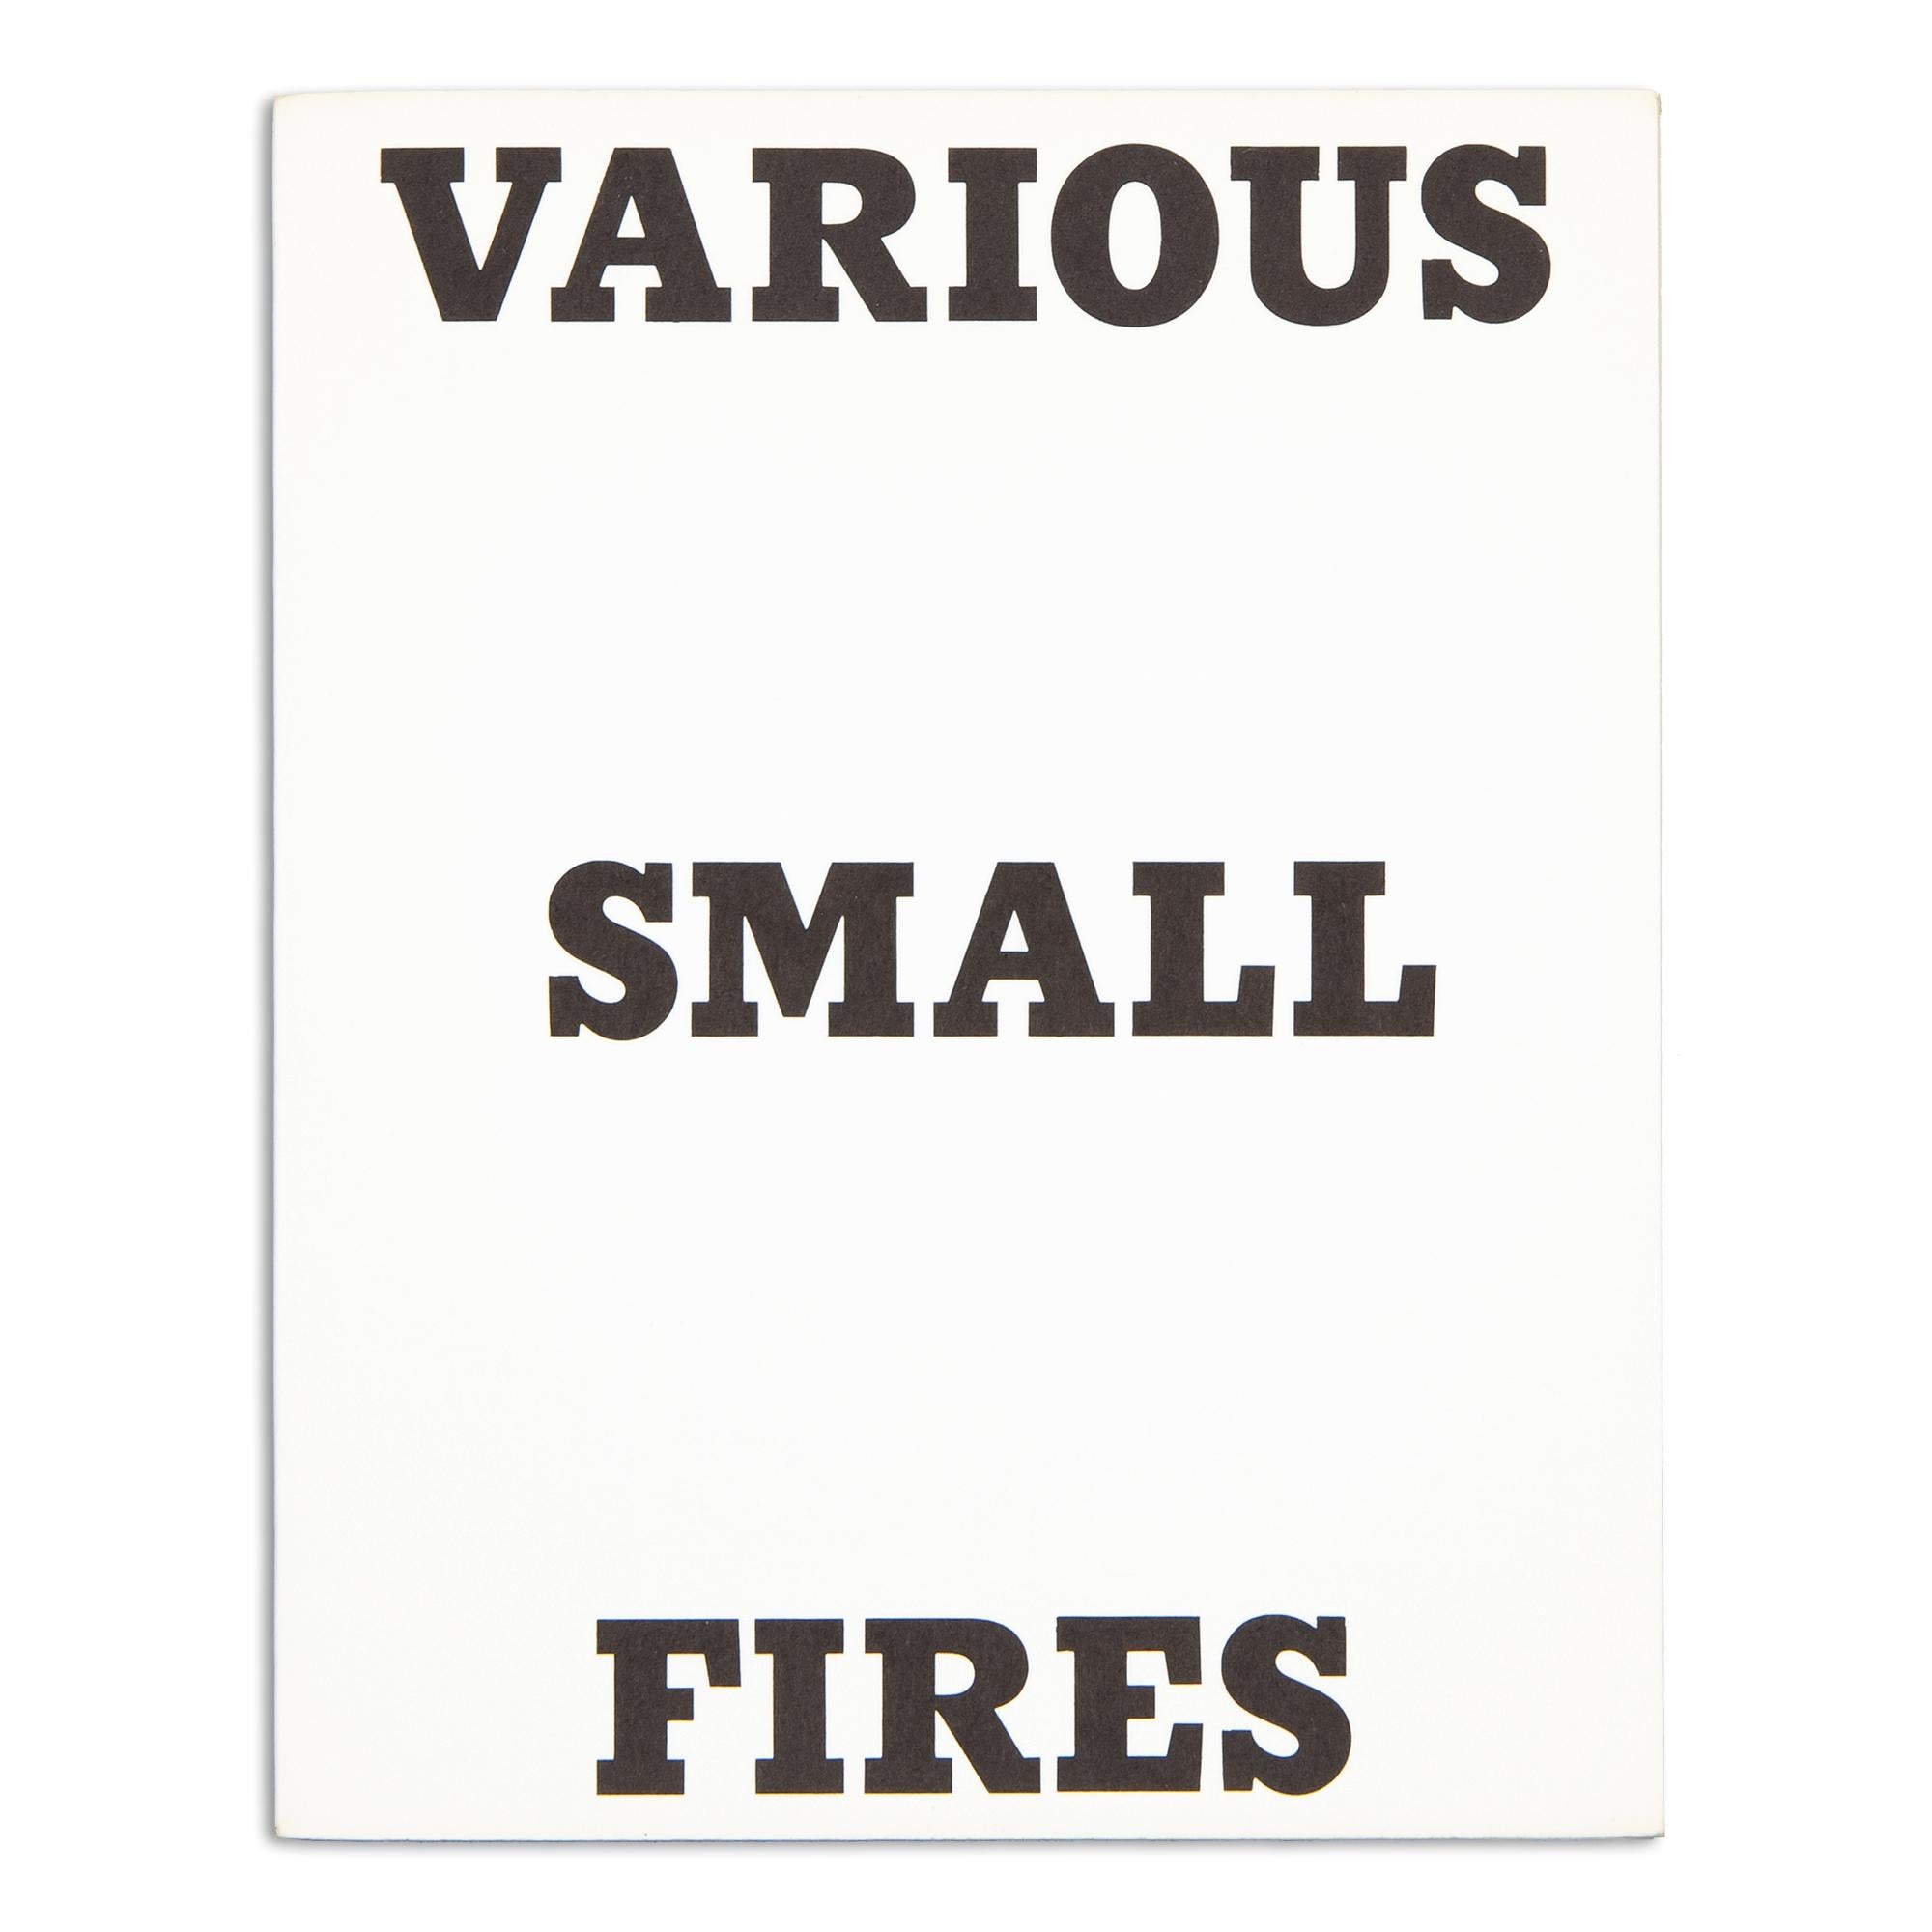 Ed Ruscha (American, b.1937)
Various Small Fires and Milk, 1964/1970
Medium: Artist’s book (48 pages), glassine dust jacket
Dimensions: 17.8 x 14.2 cm
Second edition (1970): 3000 unnumbered copies
Condition: Excellent